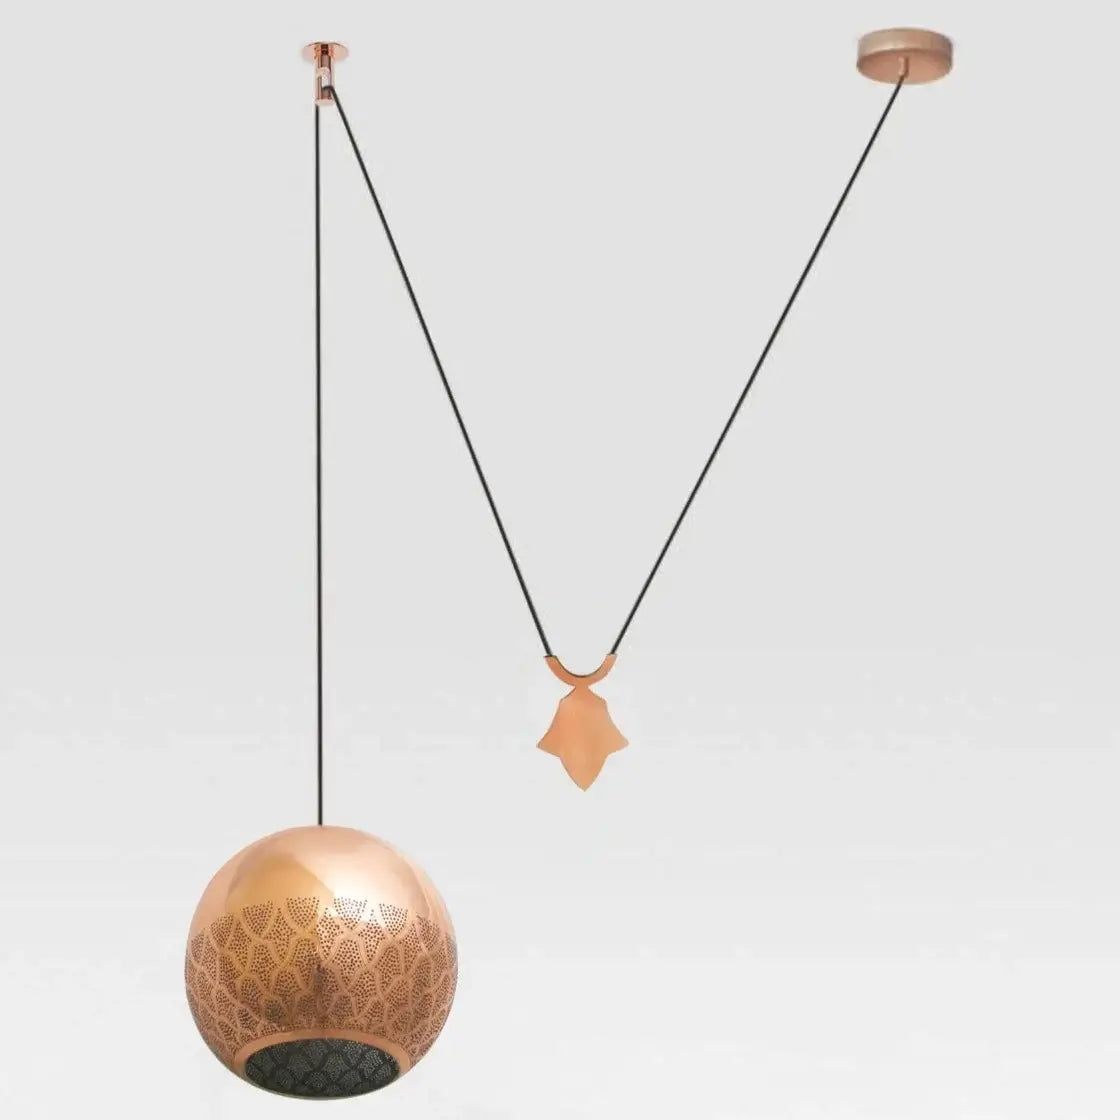 Dounia home Pendant light in Polished copper  made of Metal, Model: Nur reversed counterbalance